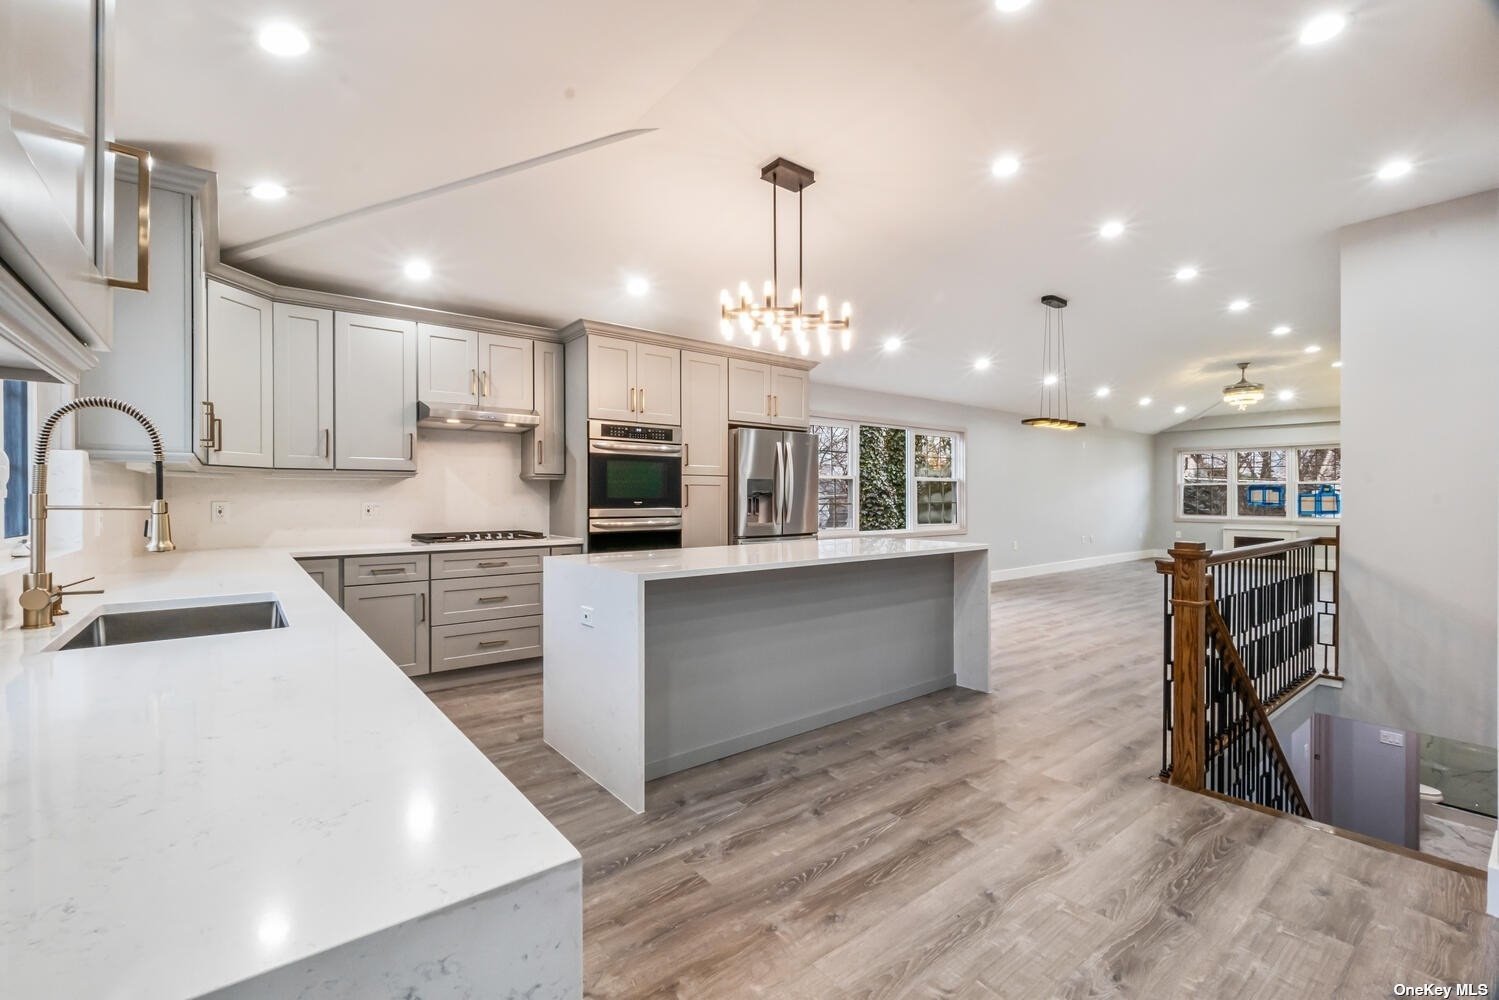 a kitchen with stainless steel appliances kitchen island wooden cabinets and a refrigerator